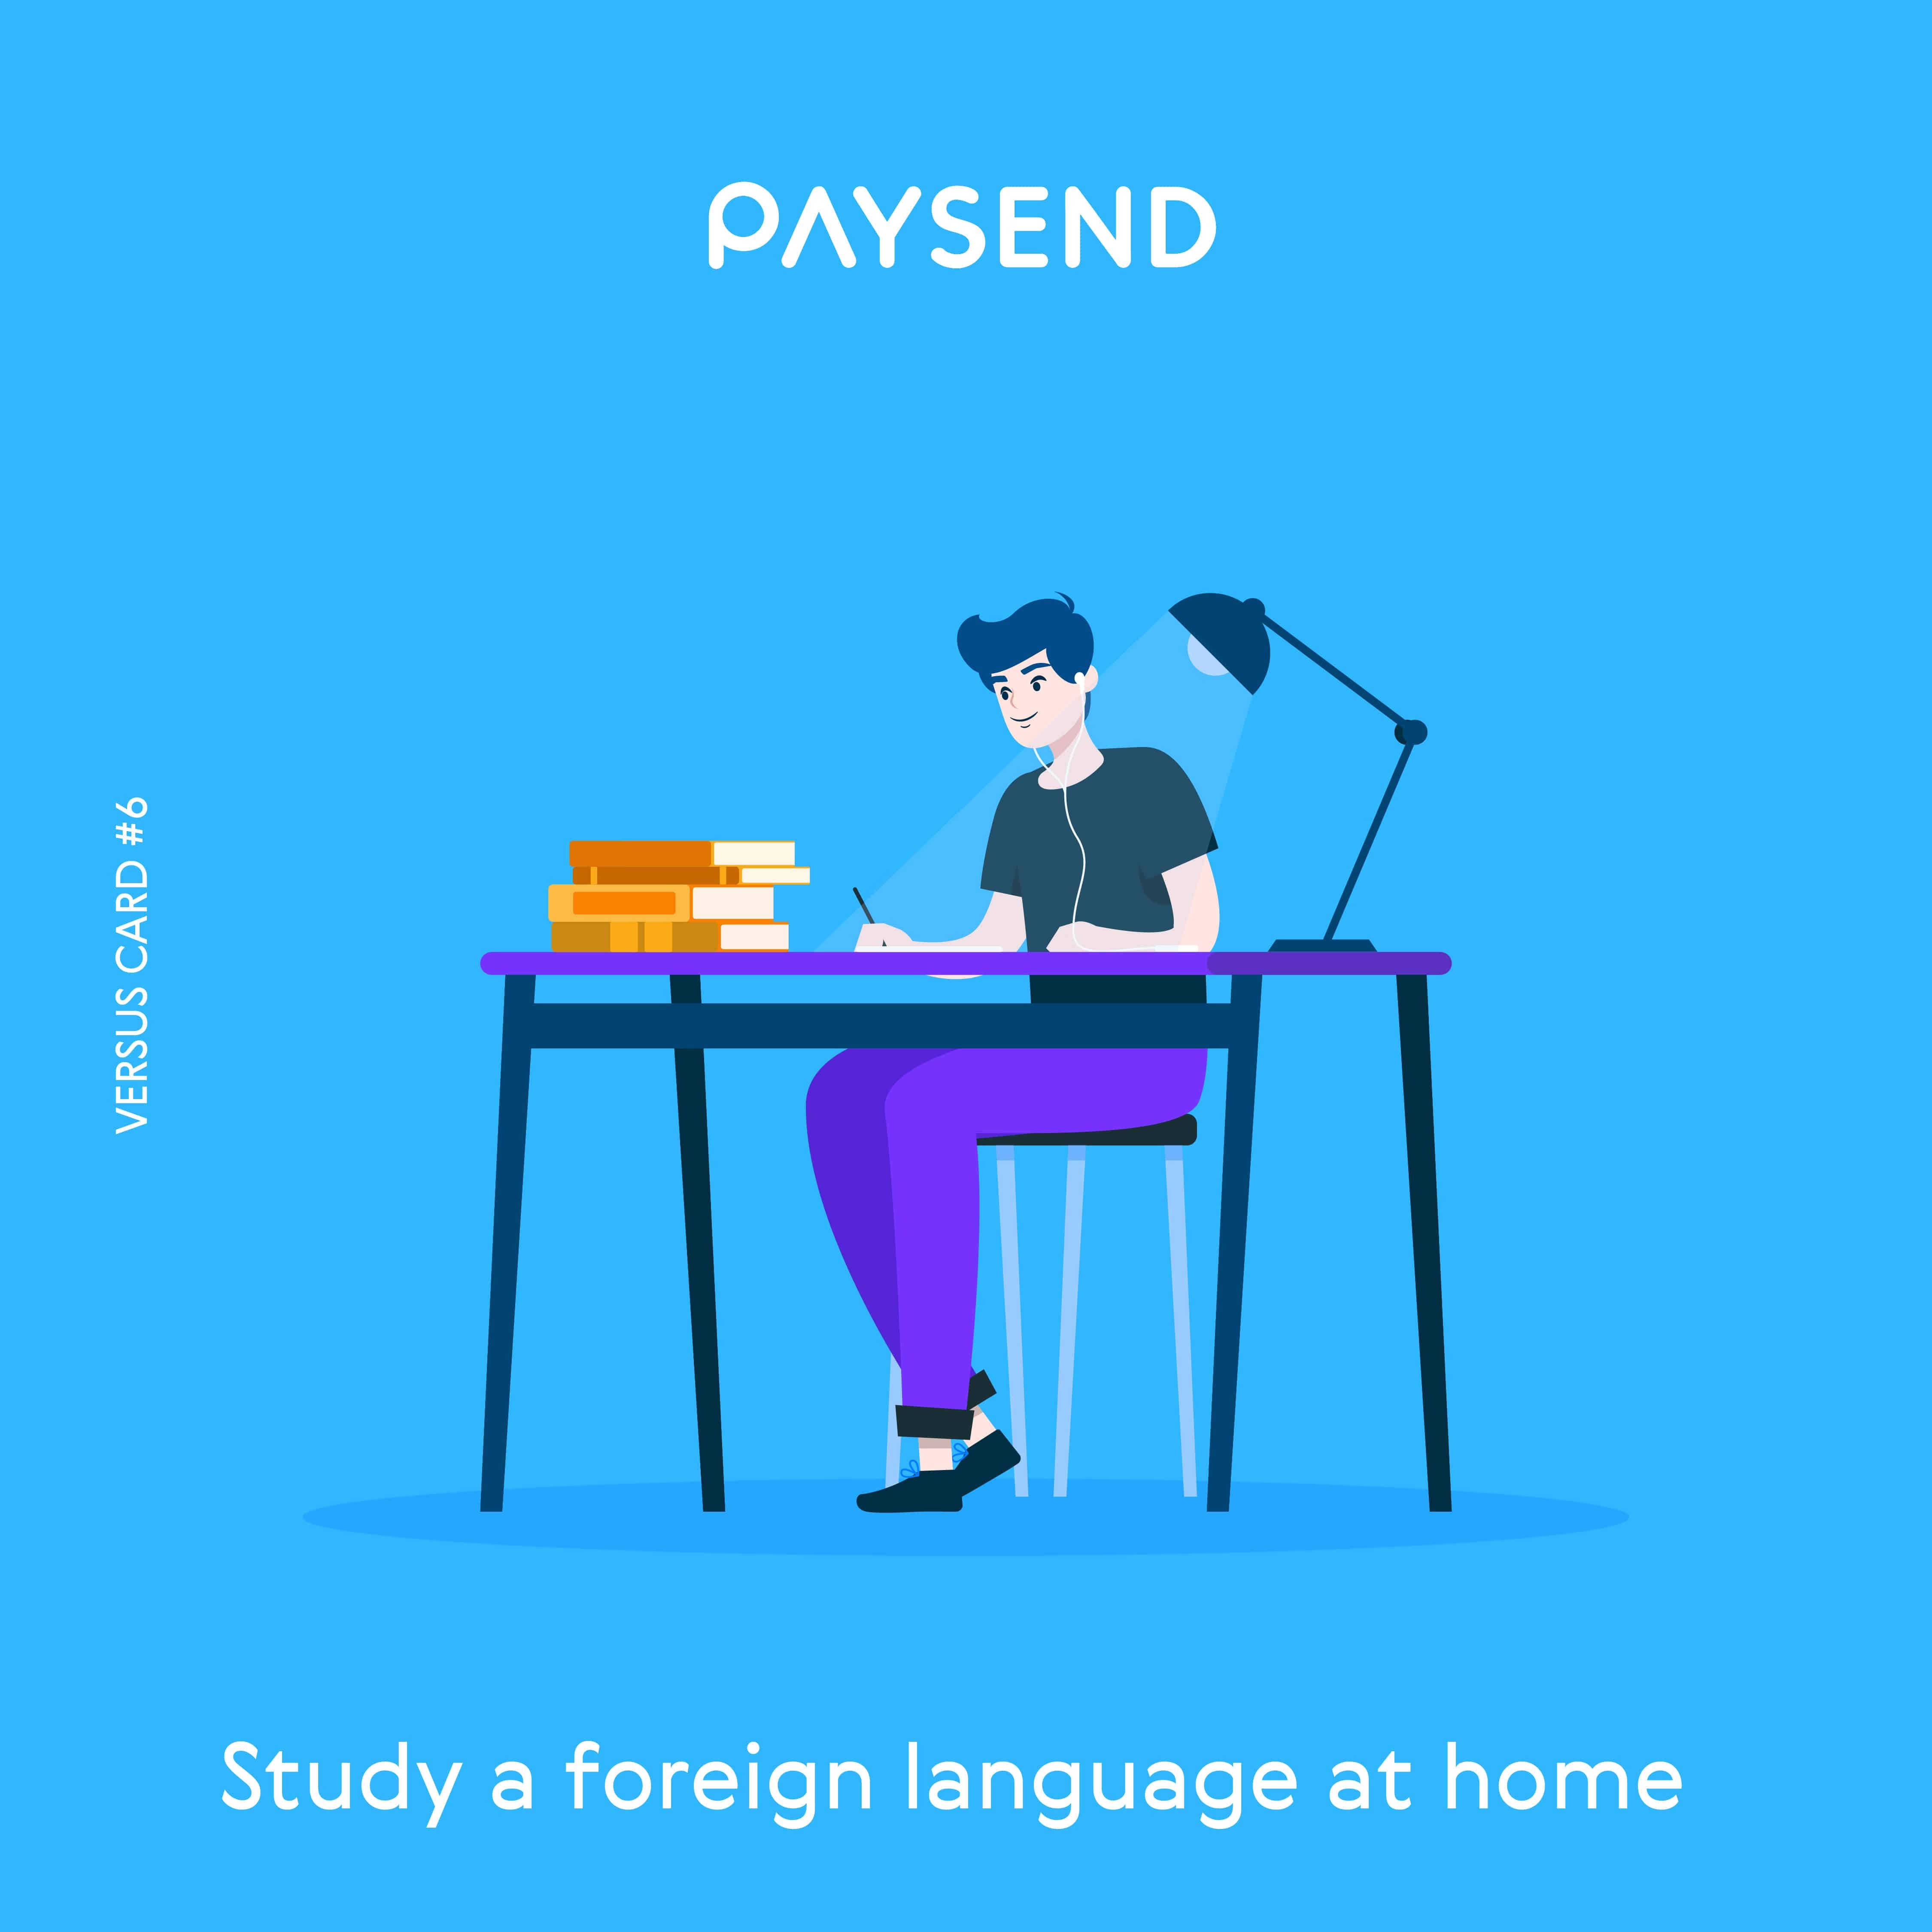 How to learn a language: at home vs abroad